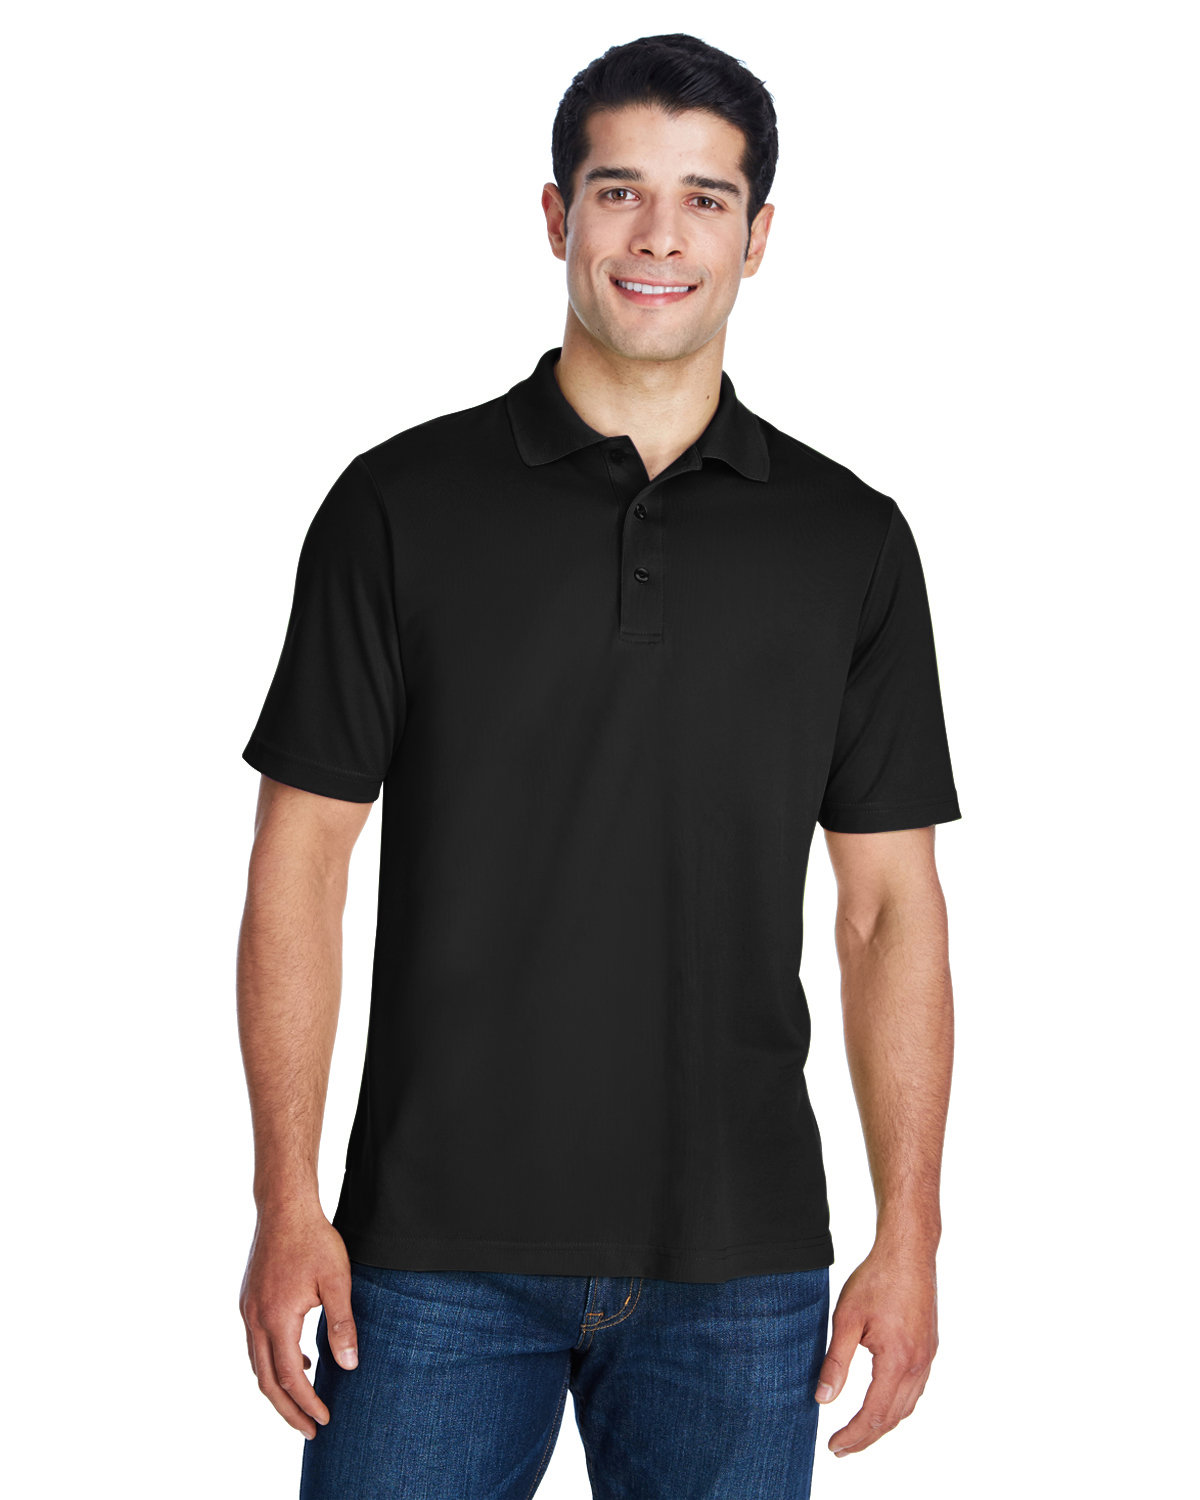 Top of the World Mens Carbon Polo